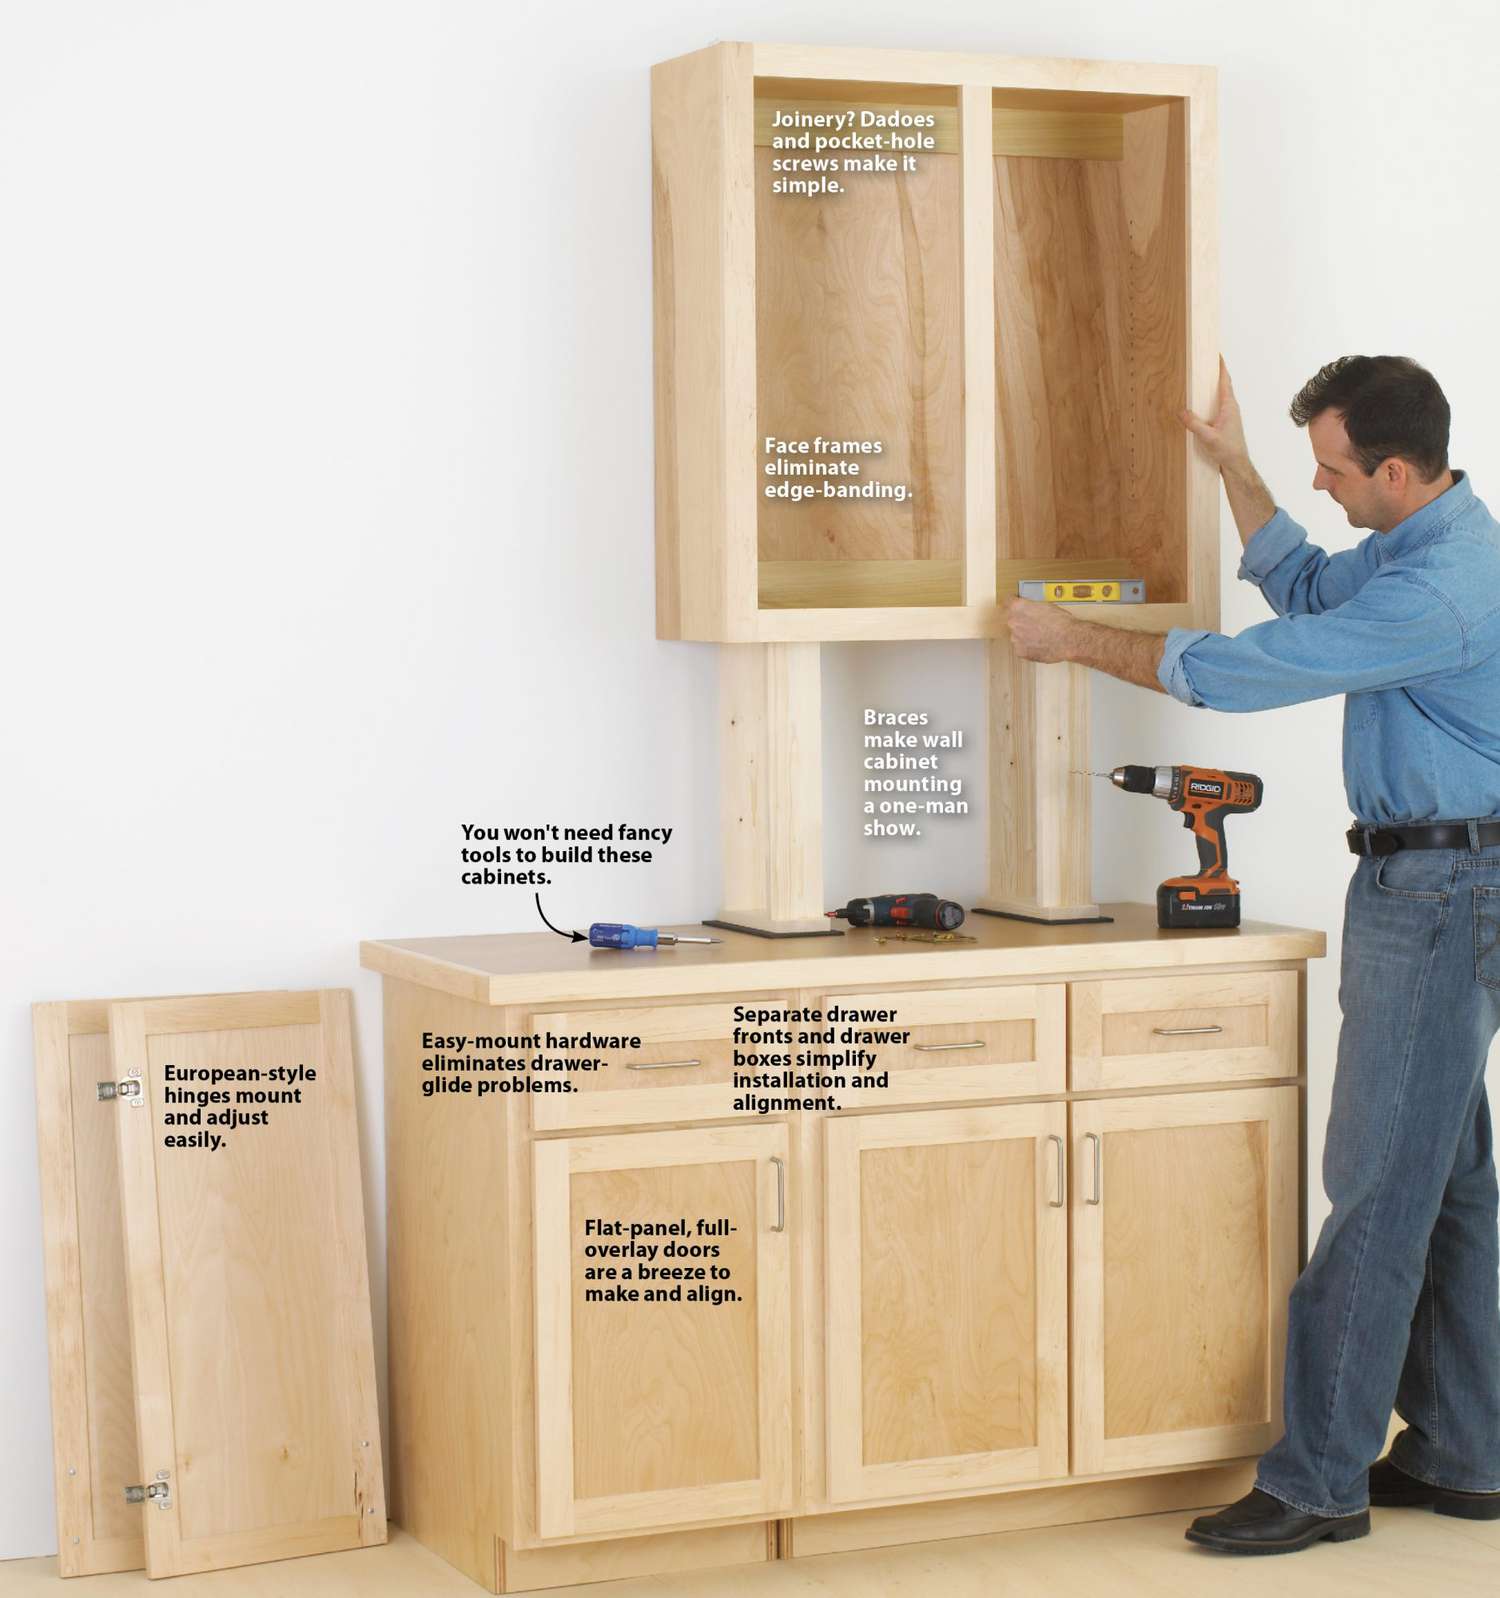 Make Cabinets The Easy Way Wood, How To Build A Wall Cabinet With Doors